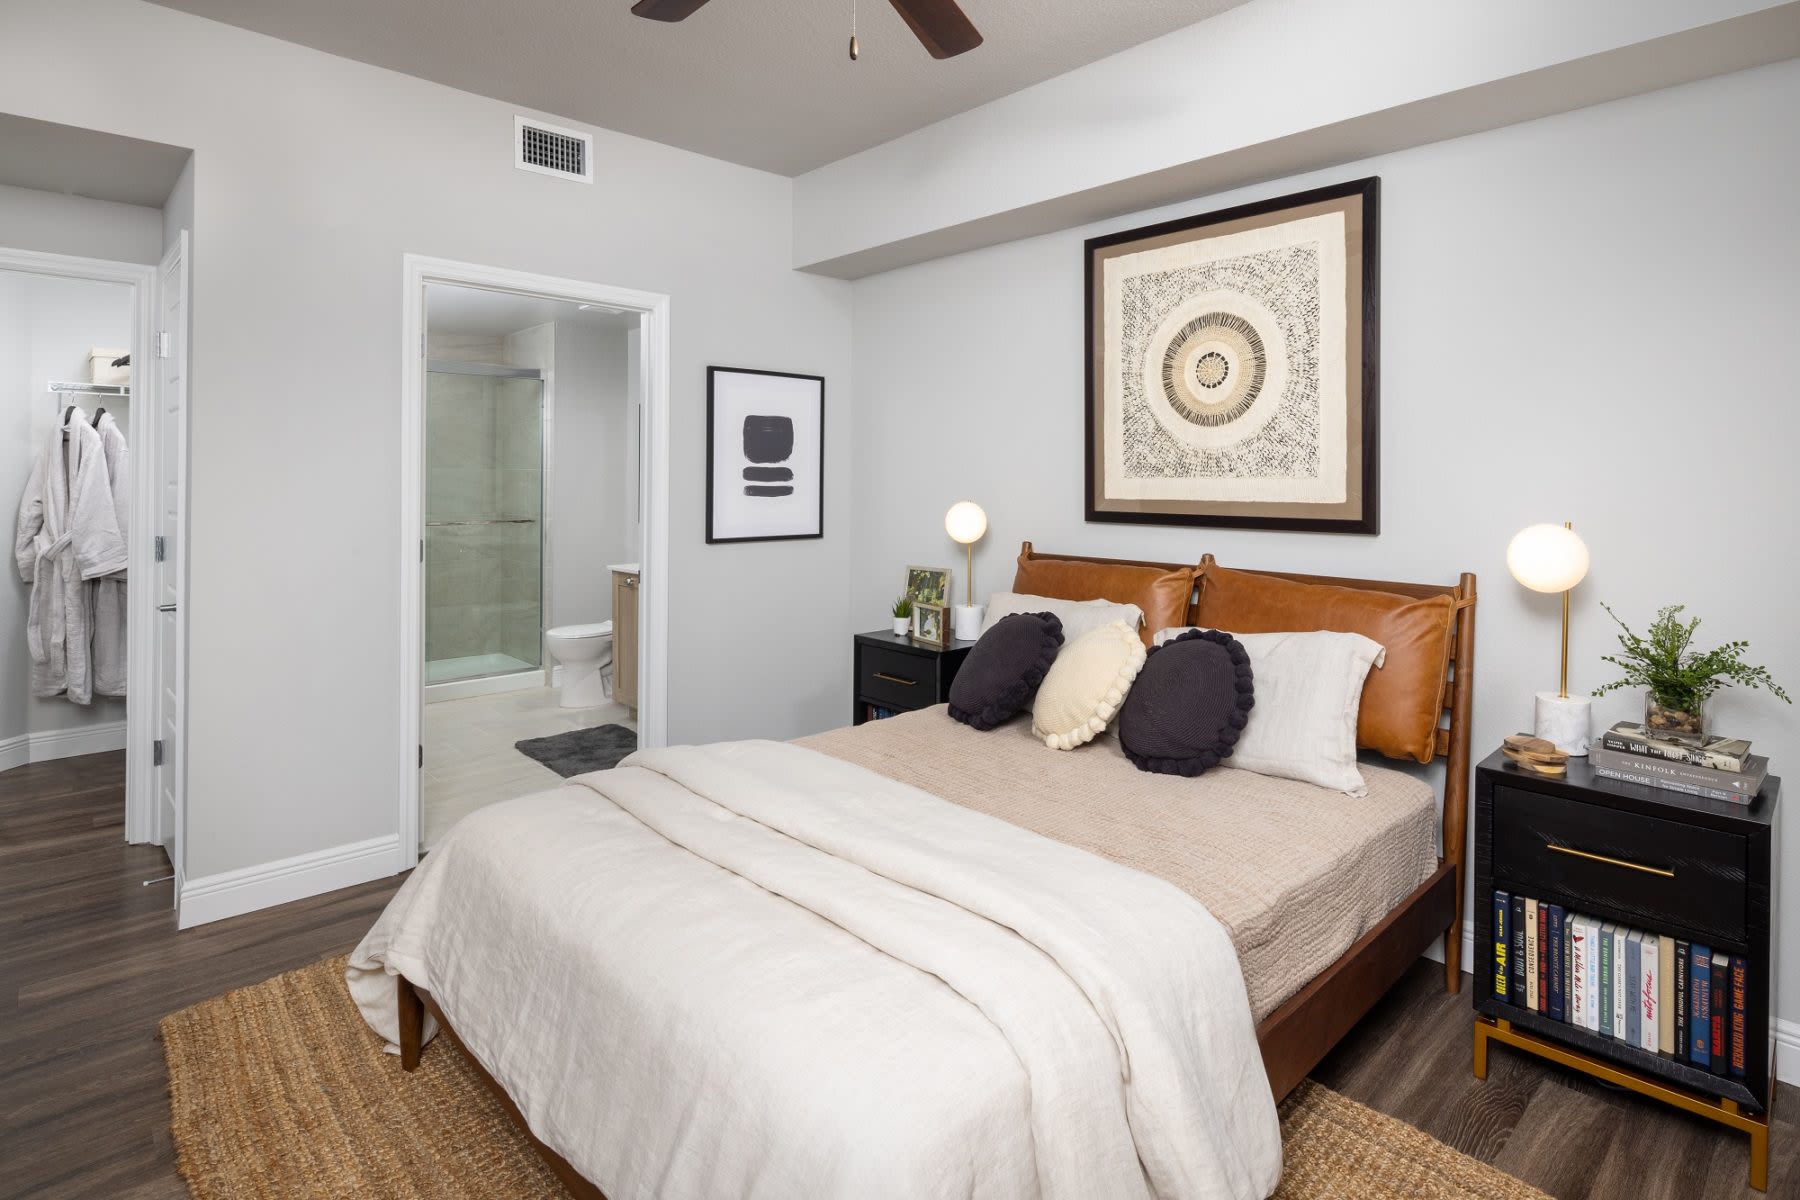 Step into a furnished apartment model bedroom at Locklyn West Palm in West Palm Beach, Florida, featuring natural light, contemporary furnishings, and wood-style flooring